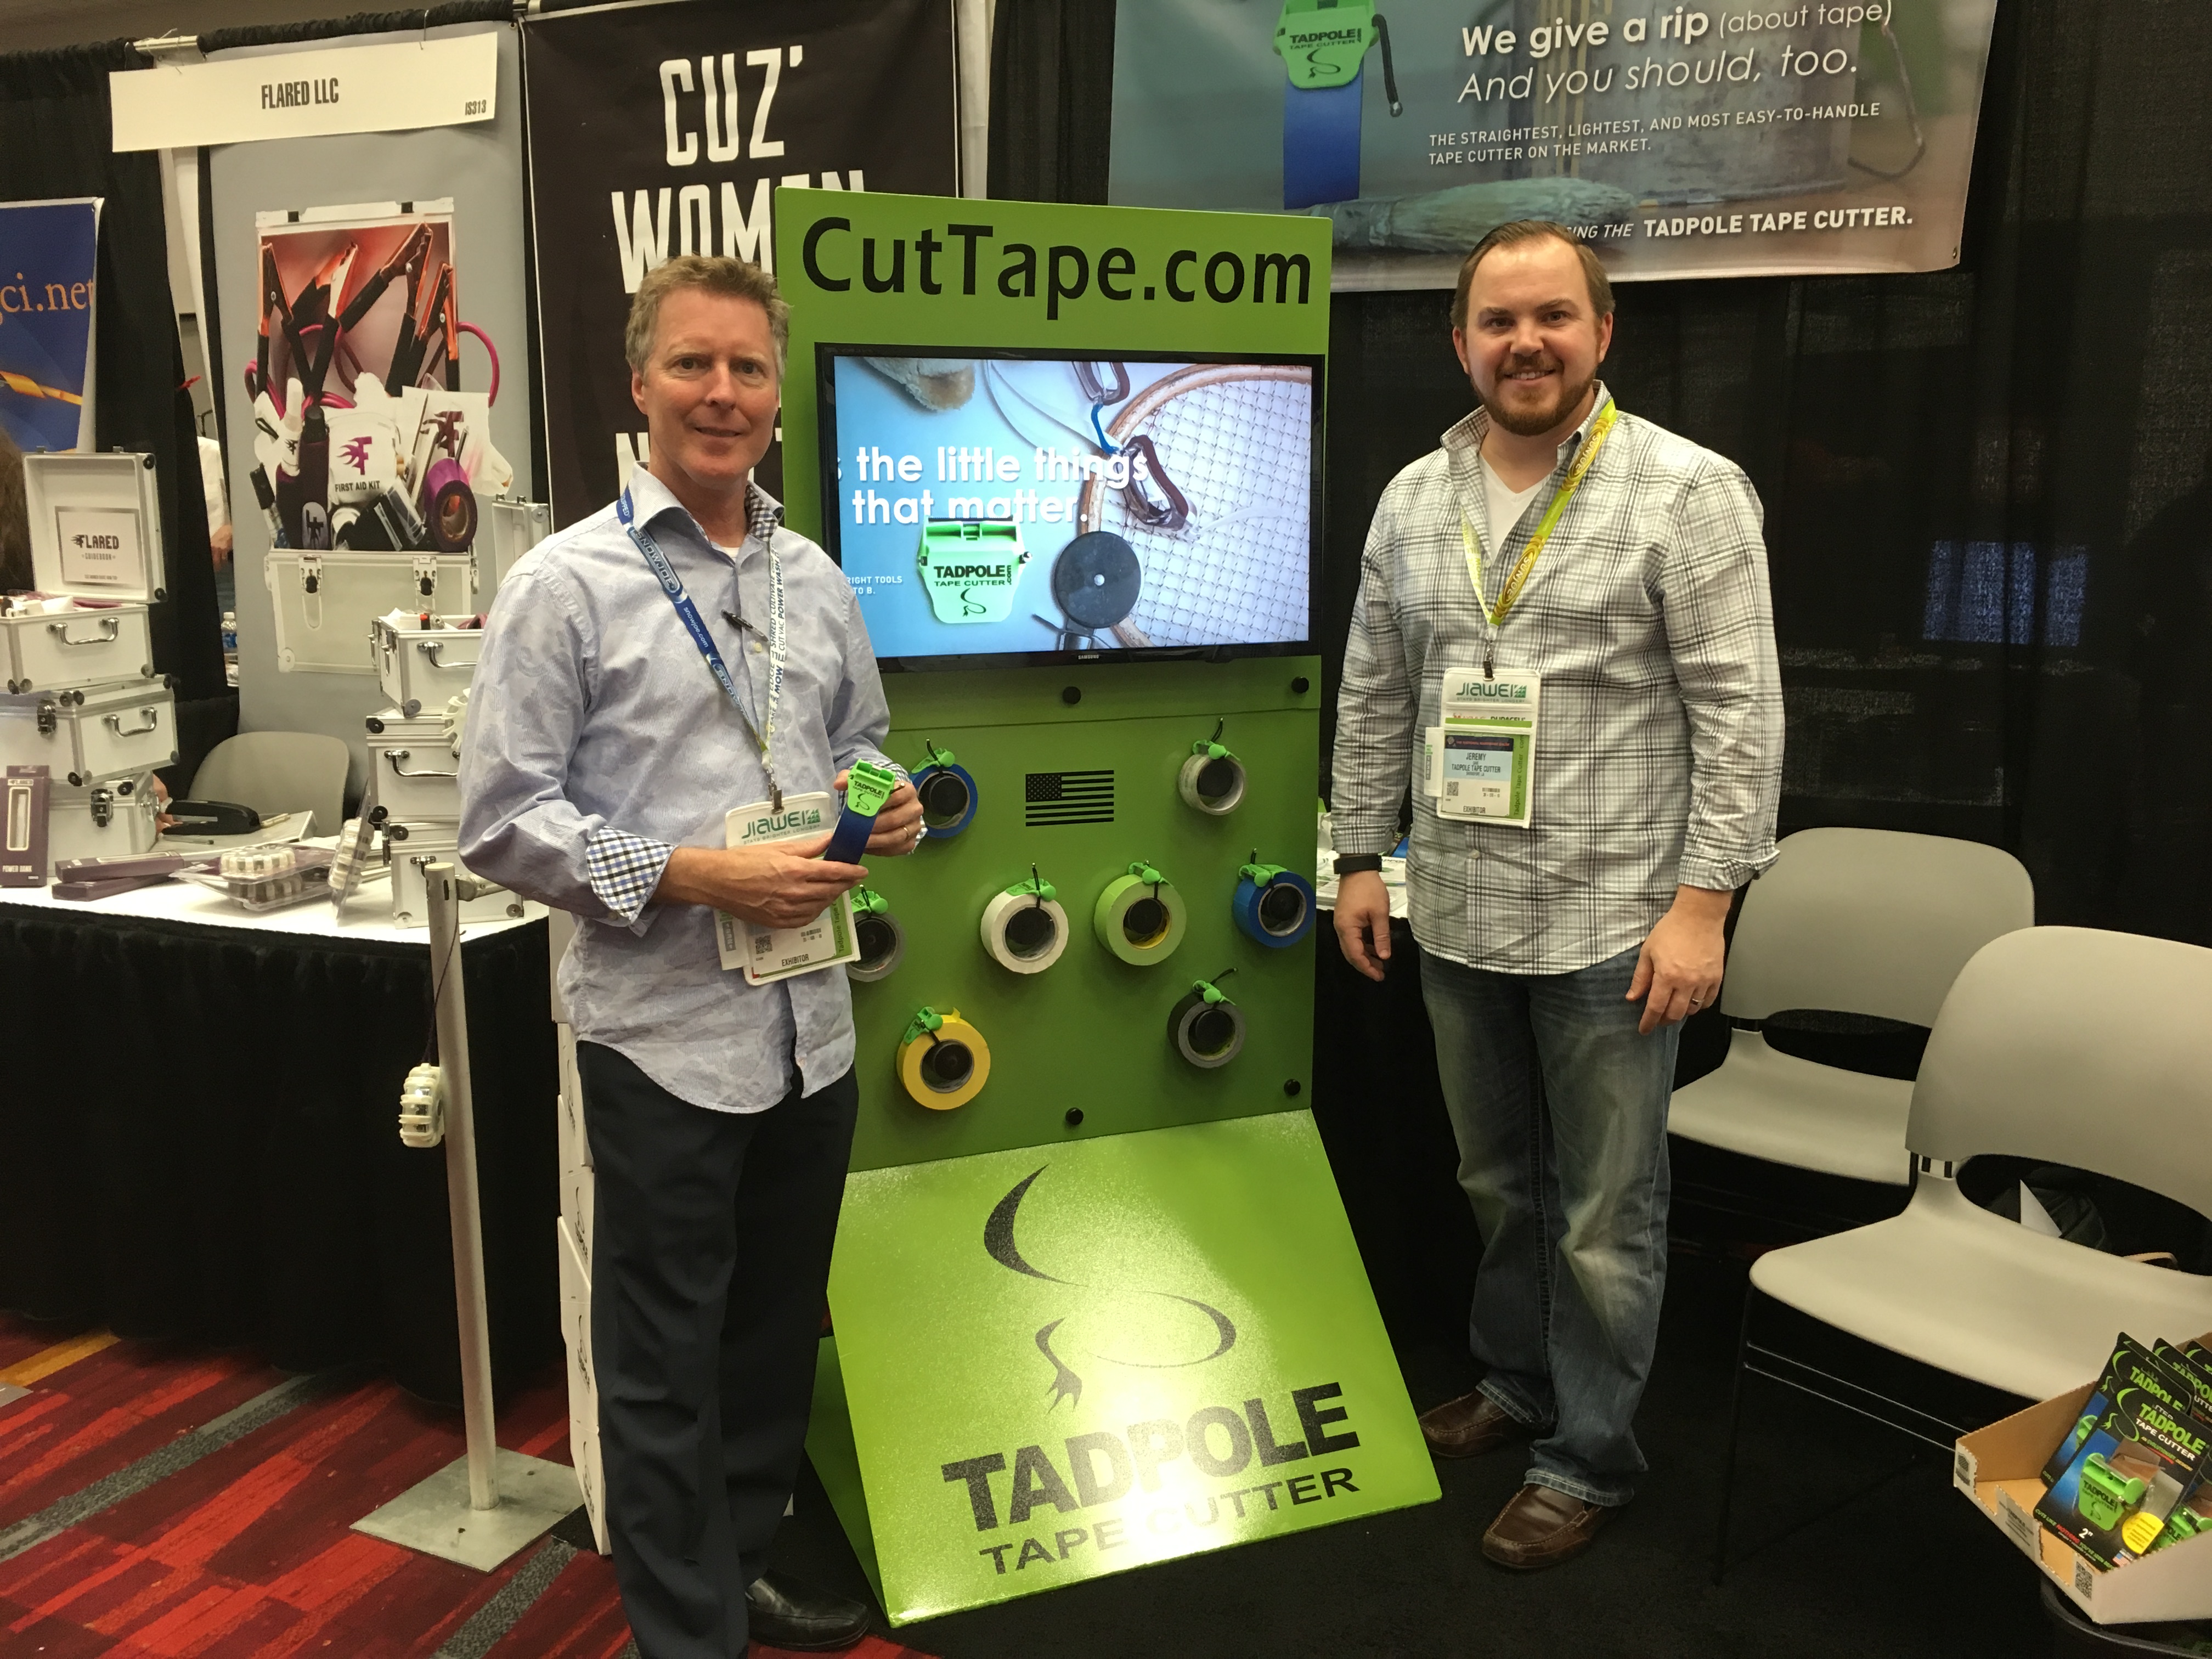 Tadpole Tape Cutter is a perfect fit for Louisiana inventor - Tadpole Tapecutter